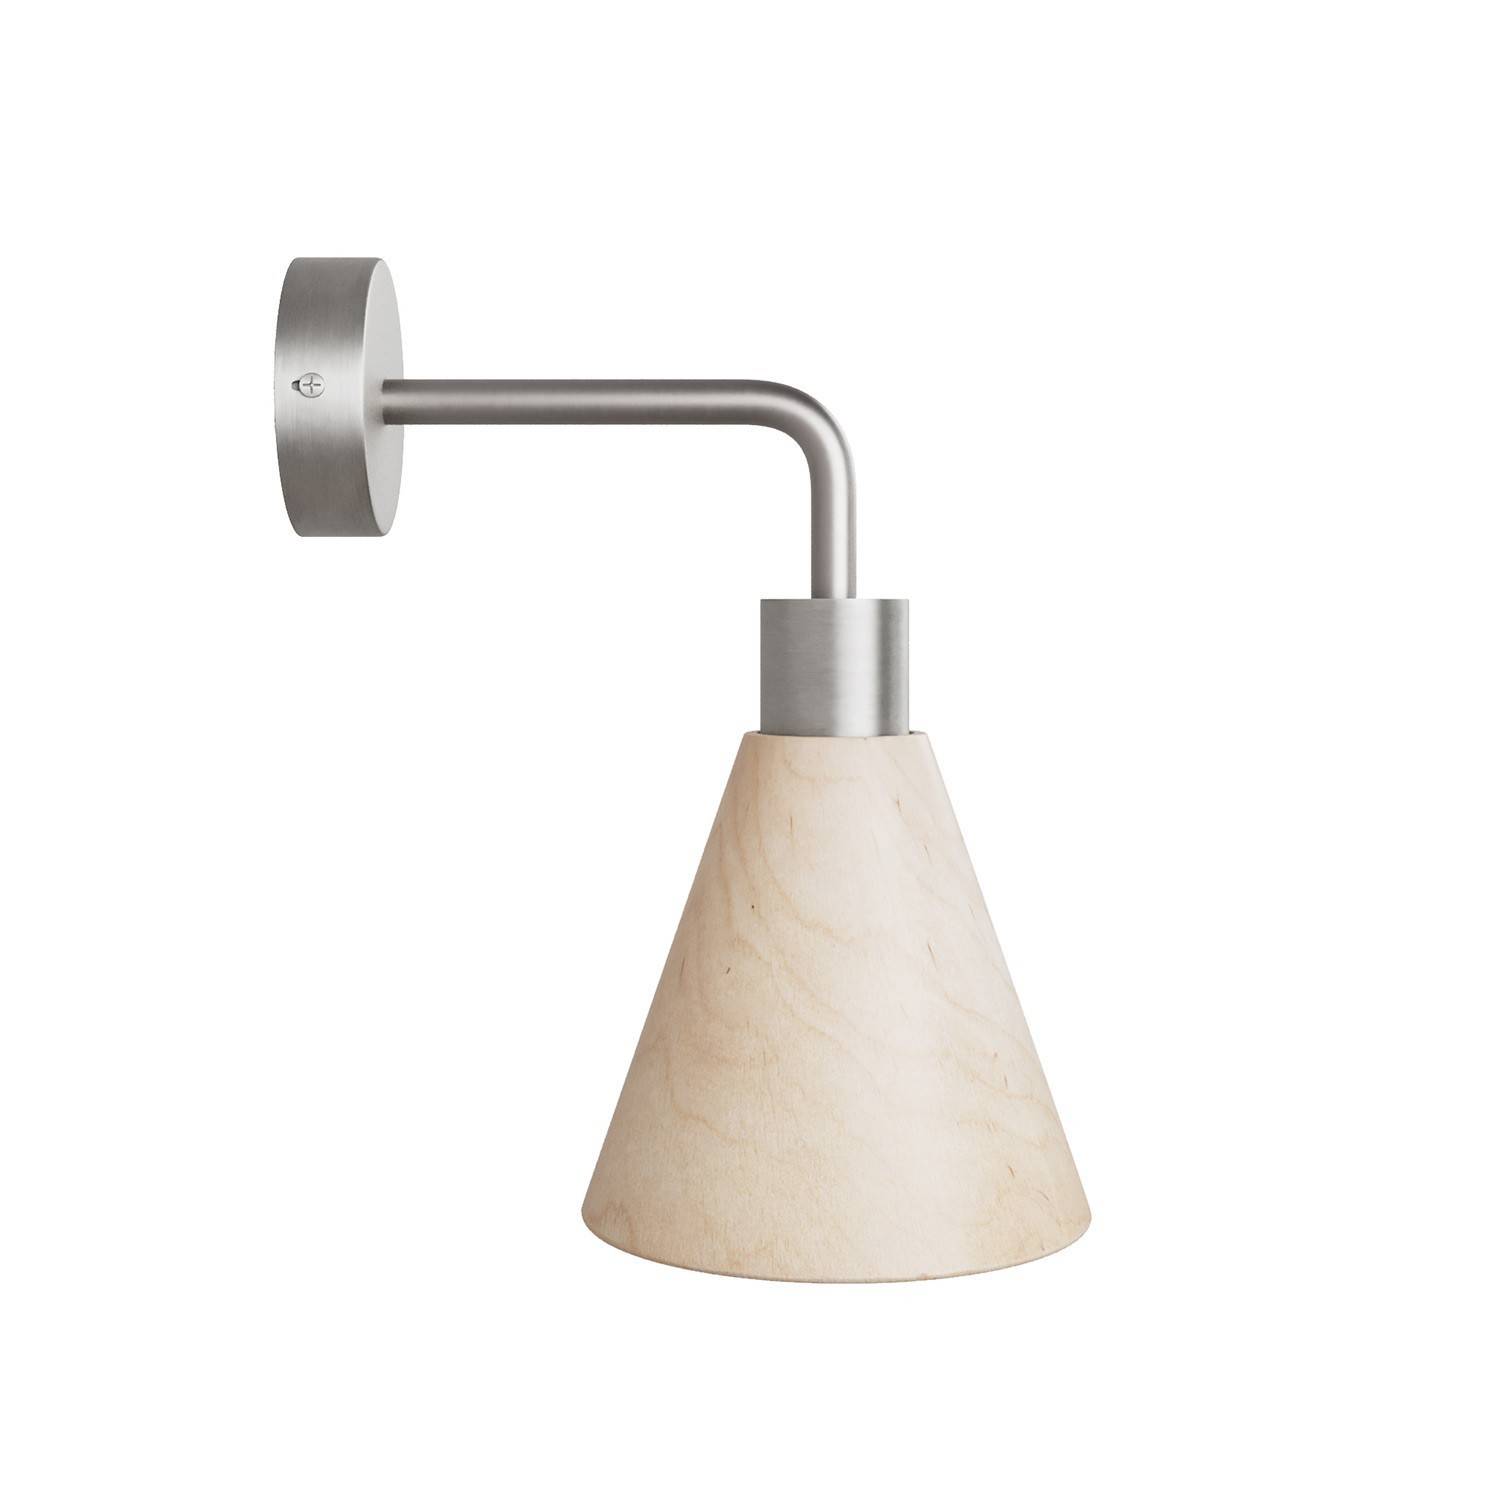 Fermaluce lamp with wooden conical lampshade and curved extension